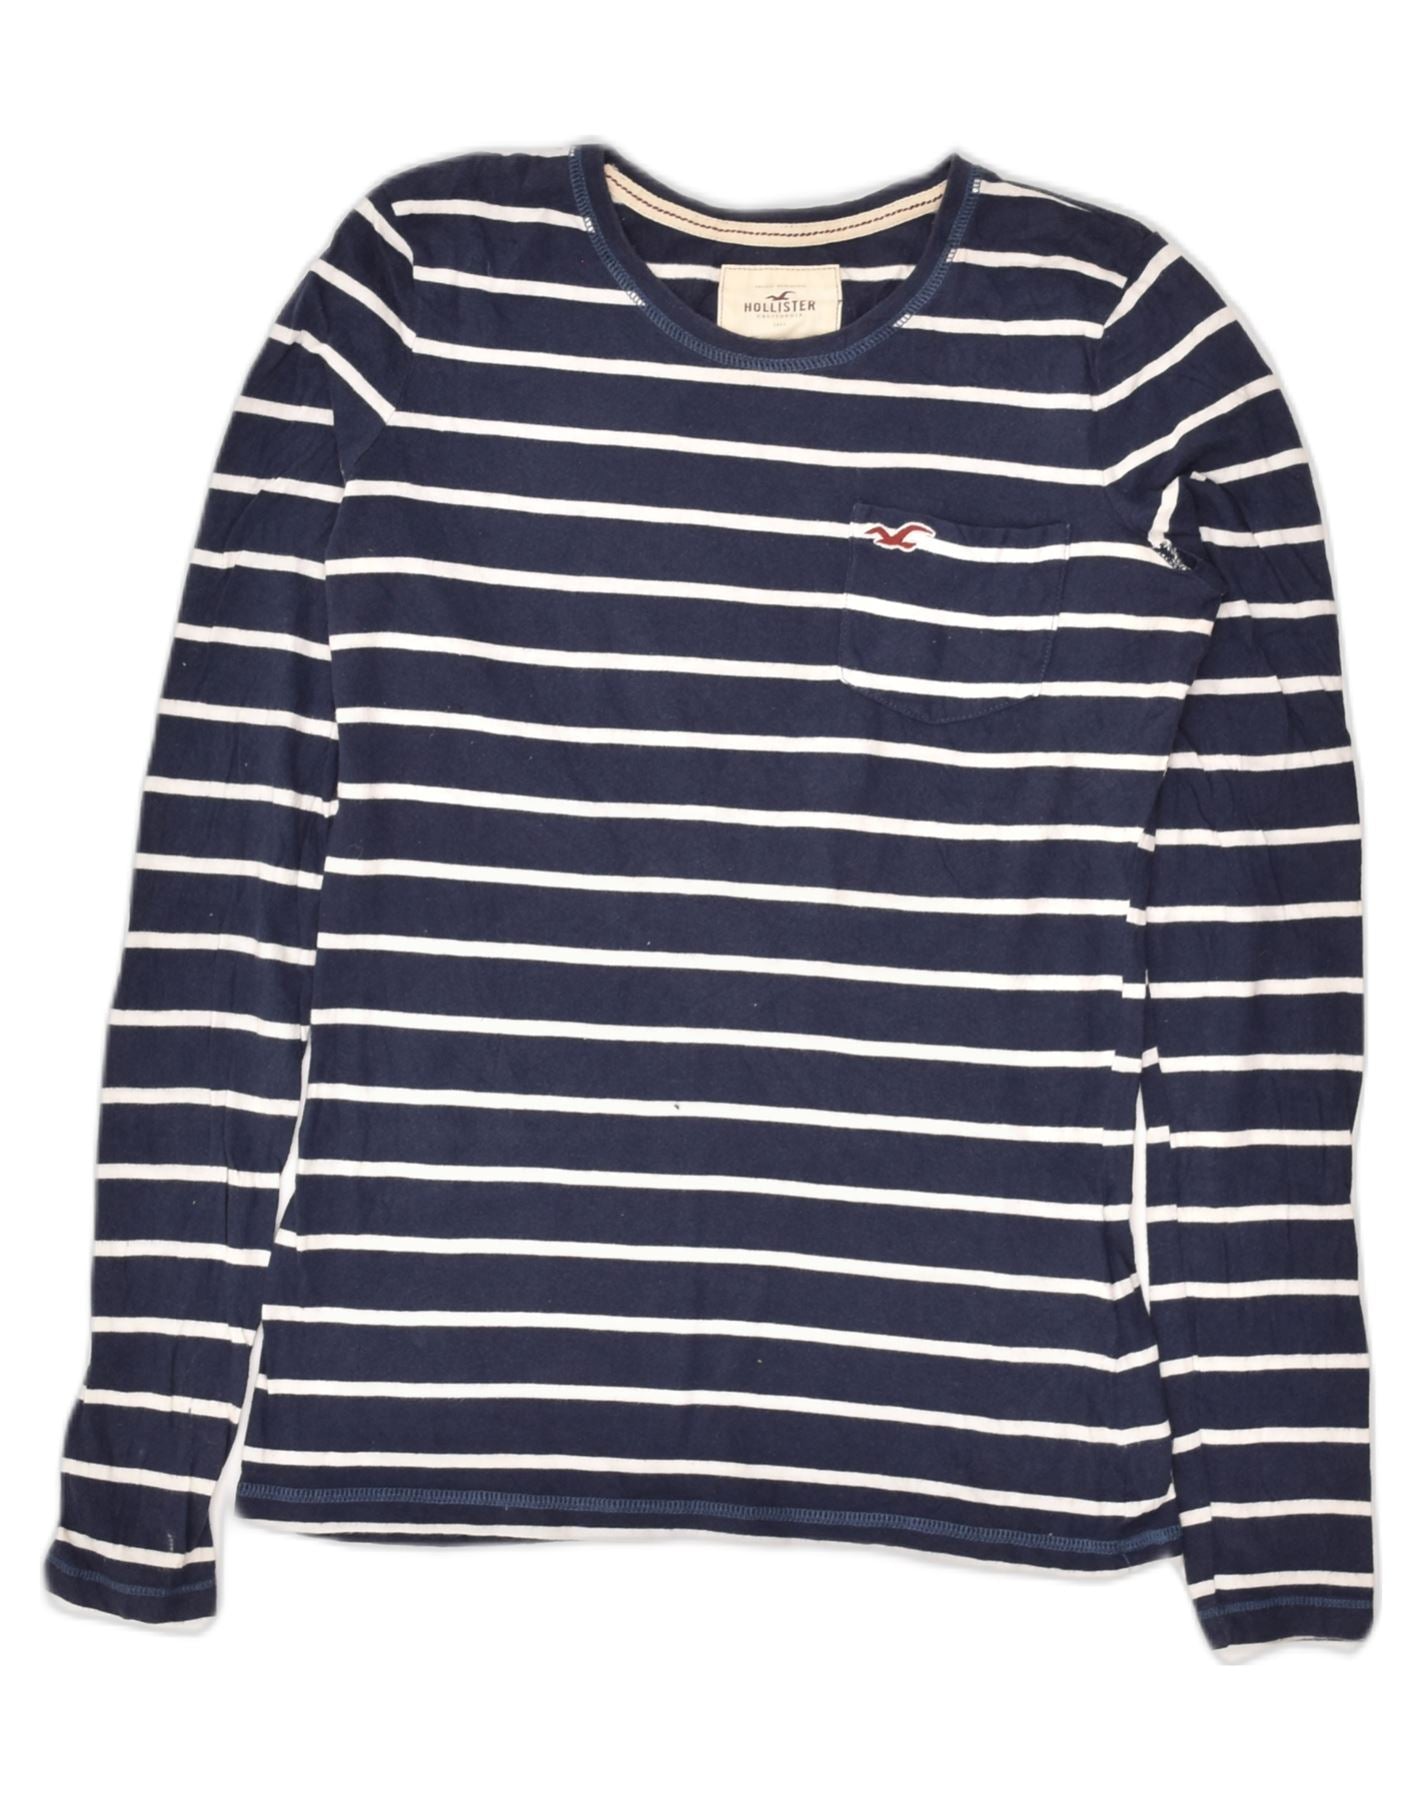 HOLLISTER Womens Top Long Sleeve UK 8 Small Navy Blue Striped Cotton, Vintage & Second-Hand Clothing Online